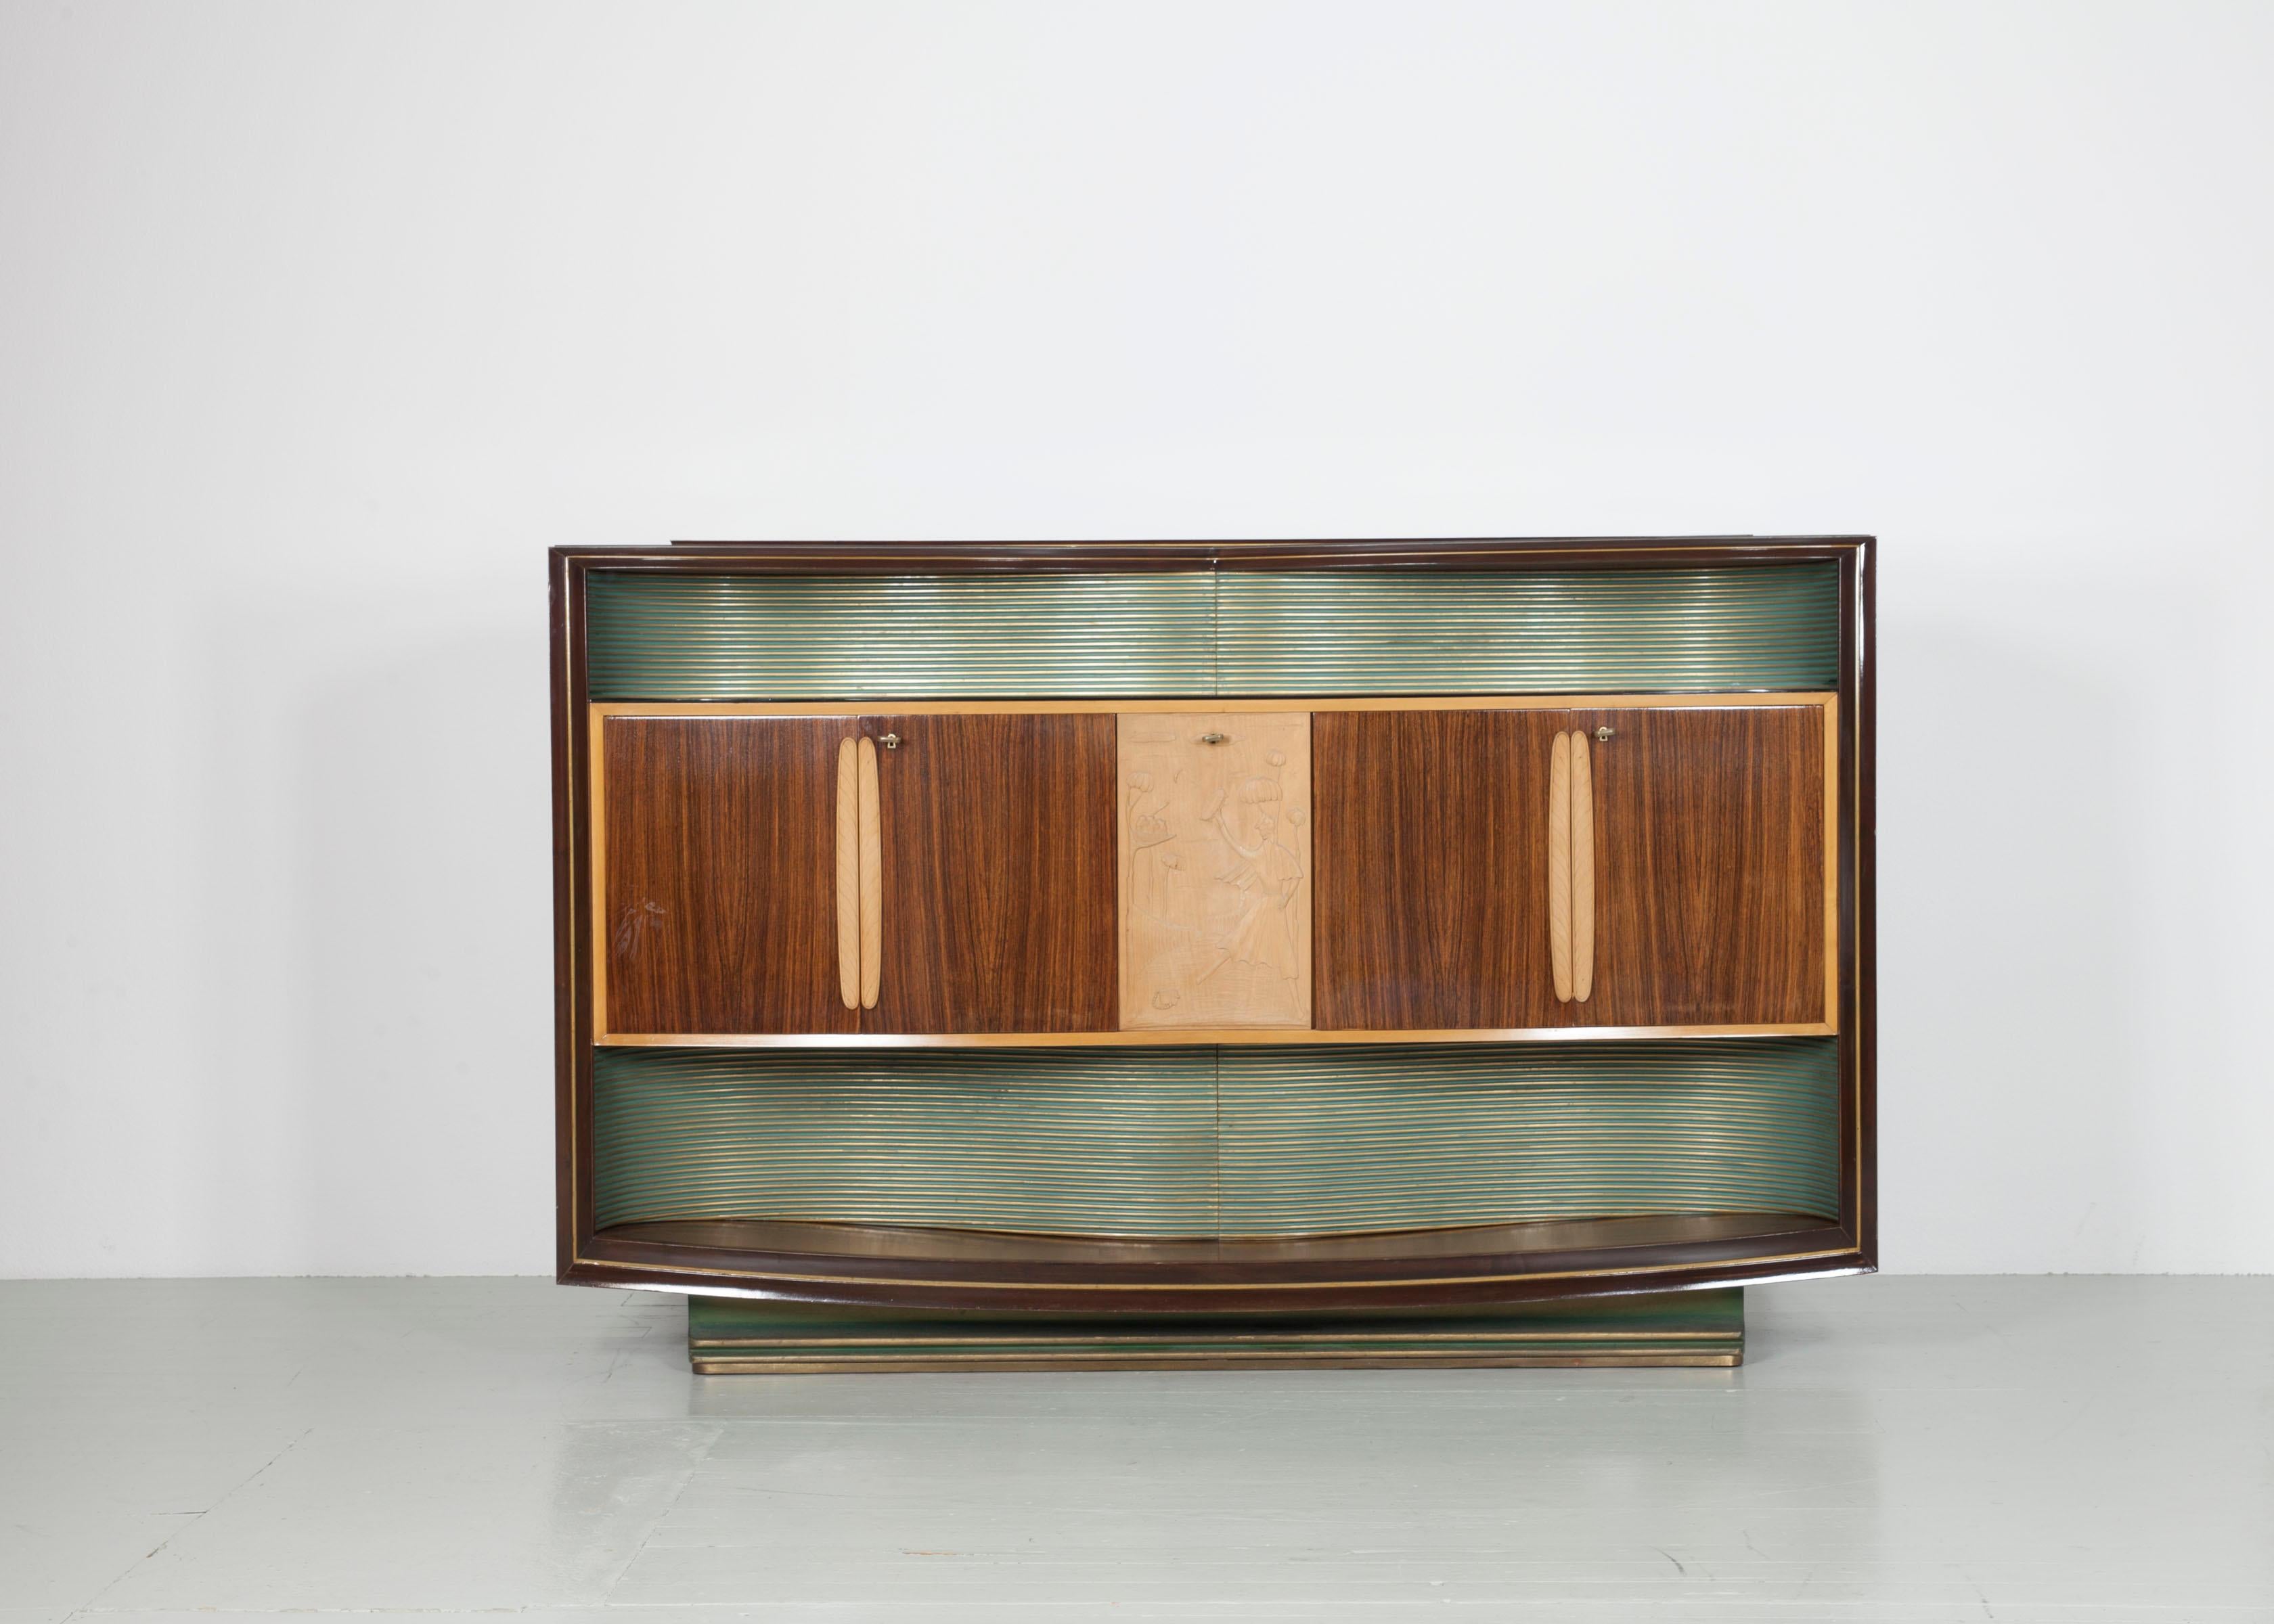 Lighted Midcentury drinks cabinet from the 1950s. Designed was the cabinet by Vittorio Dassi and manufactured by La Permanente Mobili Cantù. This massive cabinet is made of nut tree and maplewood. Behind the doors is a etched mirror with sun and